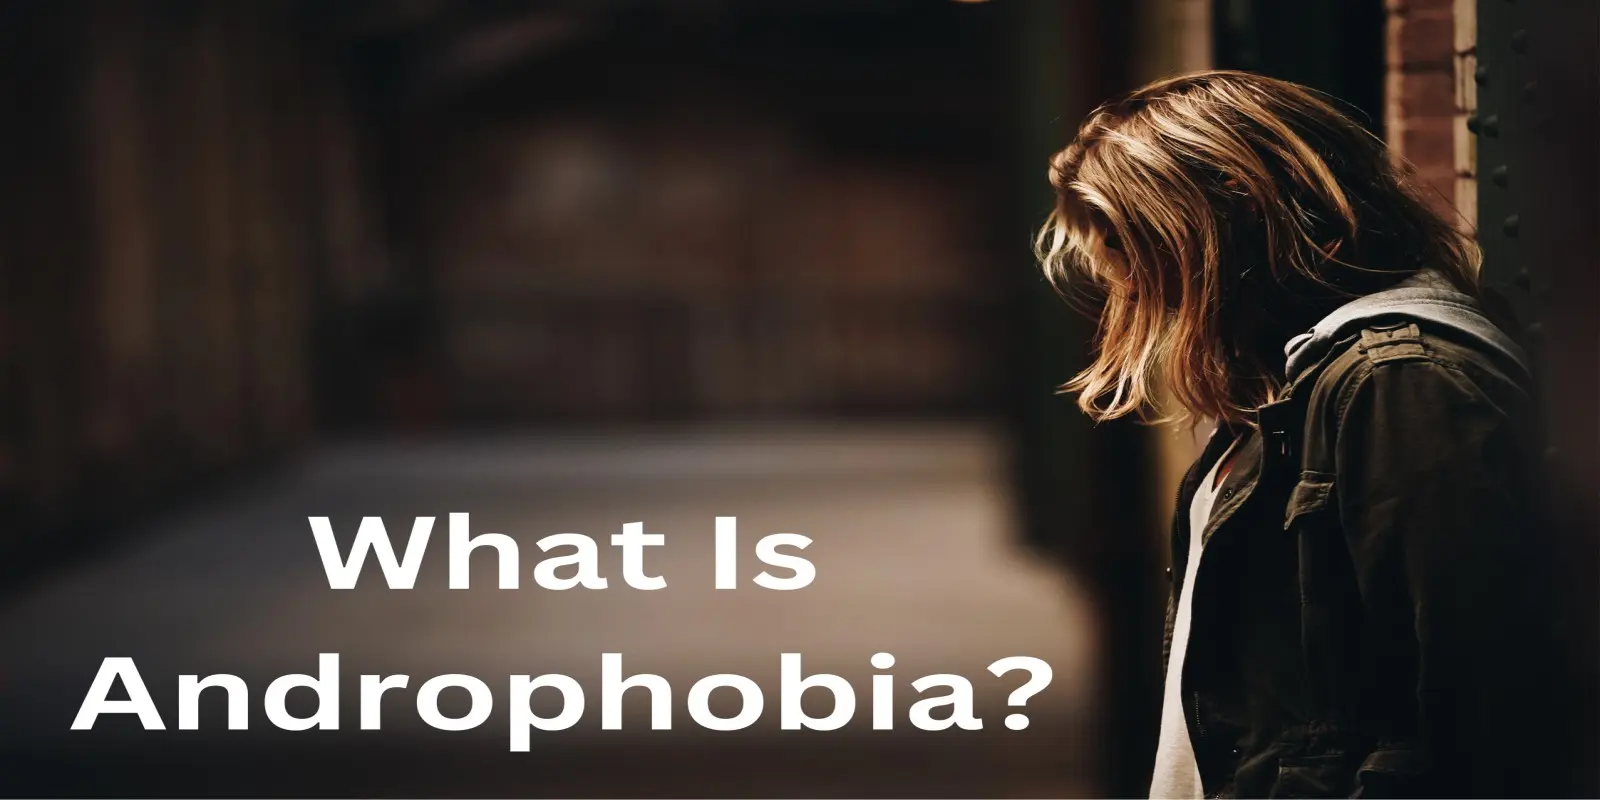 What Is Androphobia?